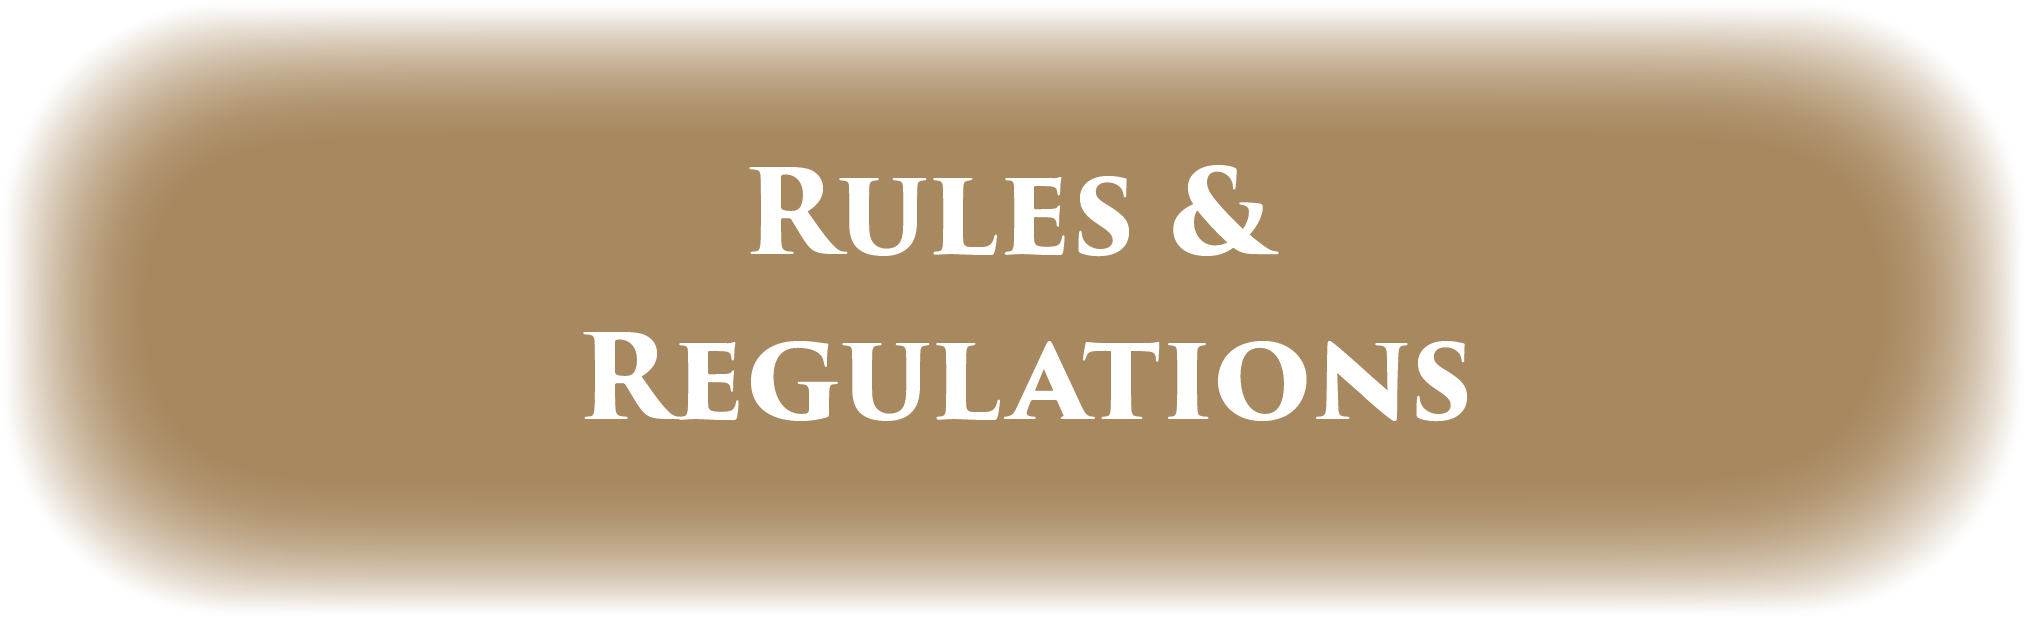 Read the Rules & Regulations